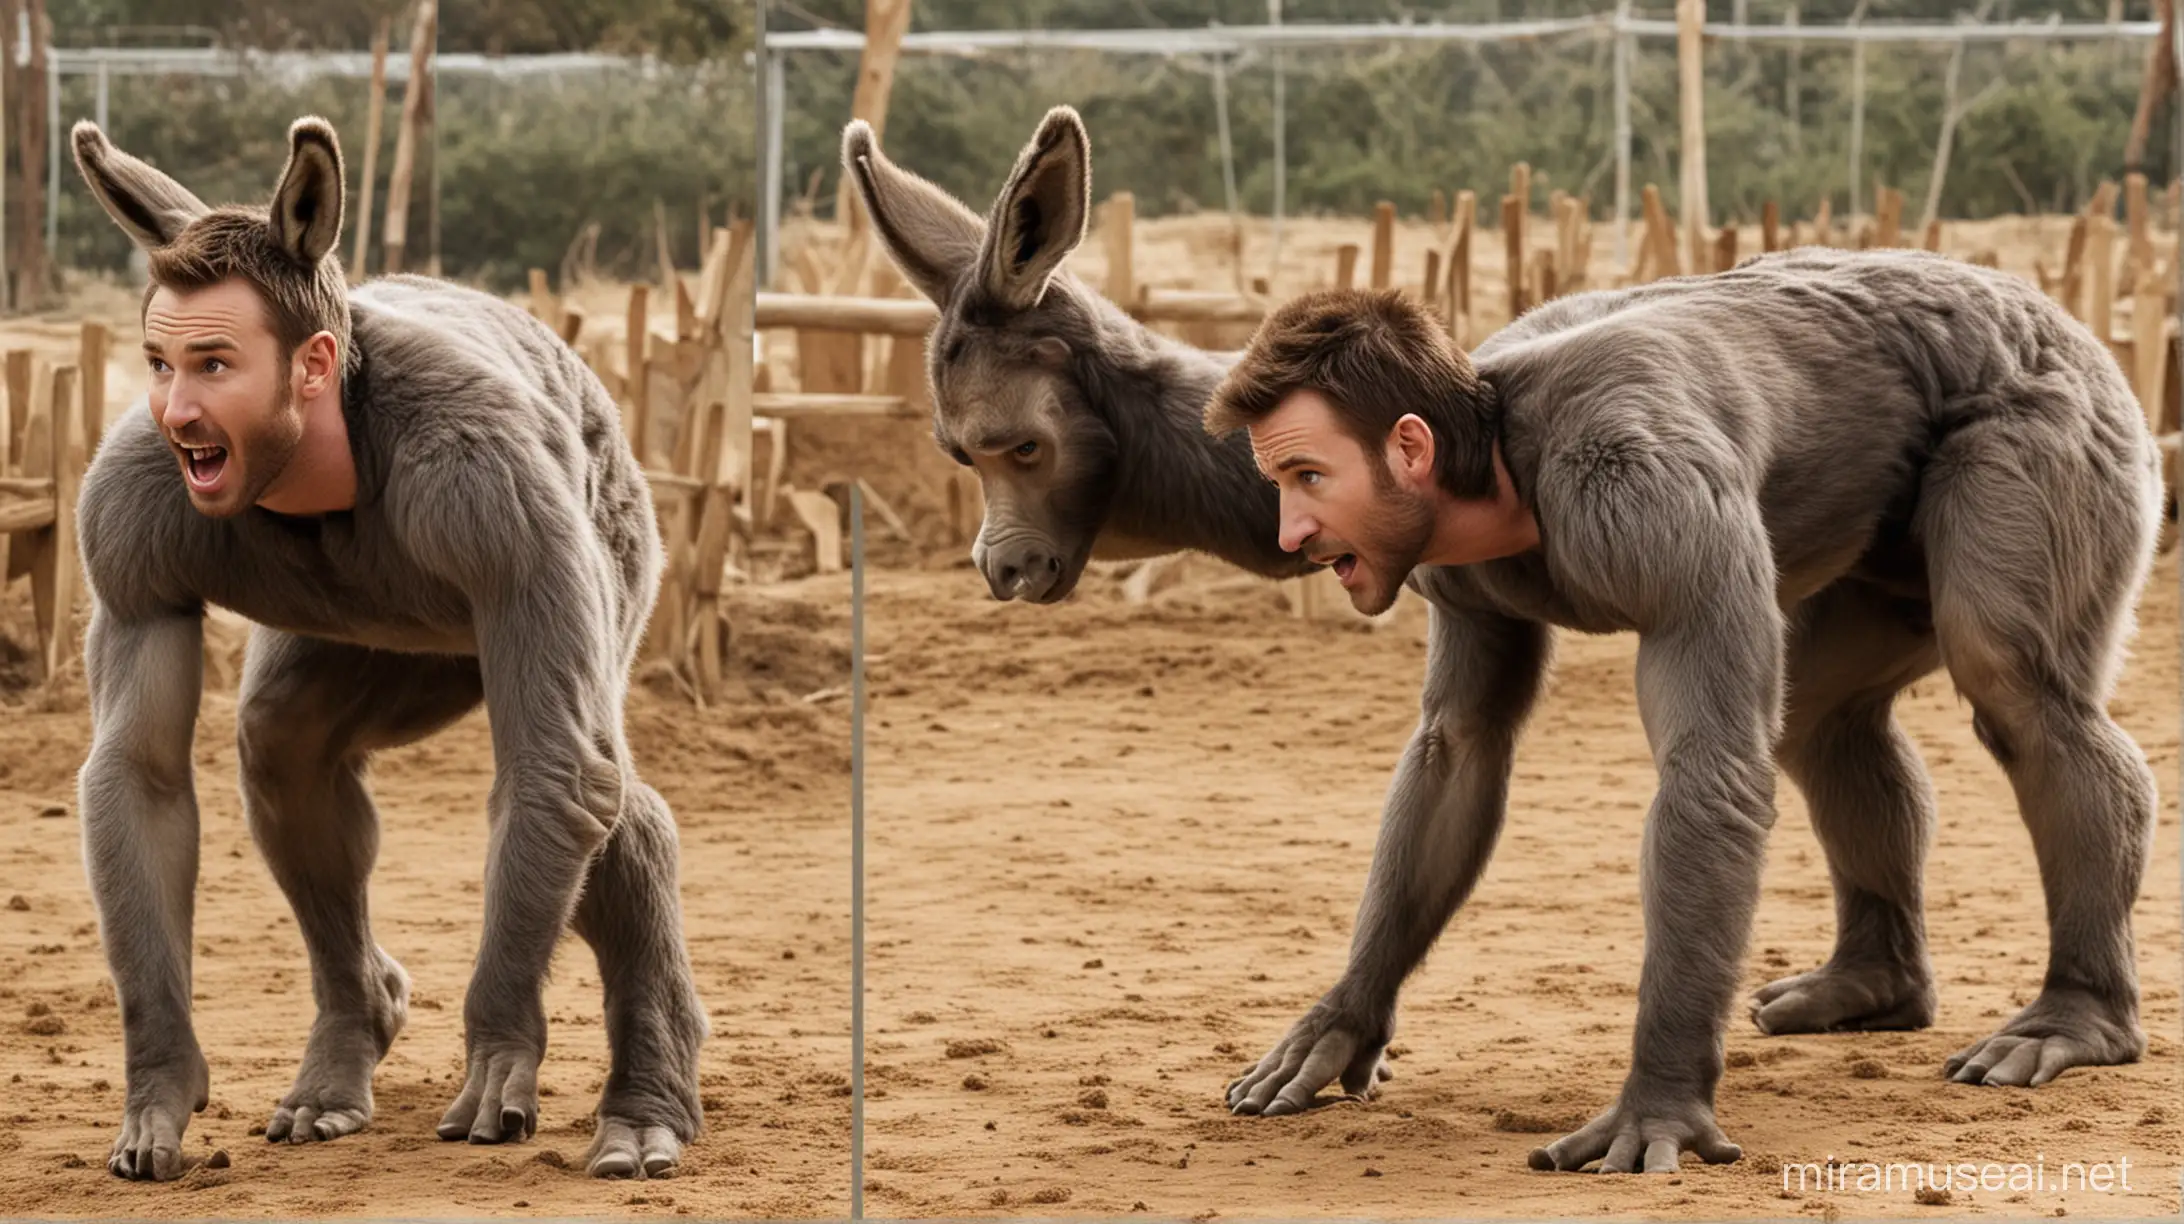 Chris Evans Transforms into a Donkey Actor Morphs into Donkey Form with Human Head